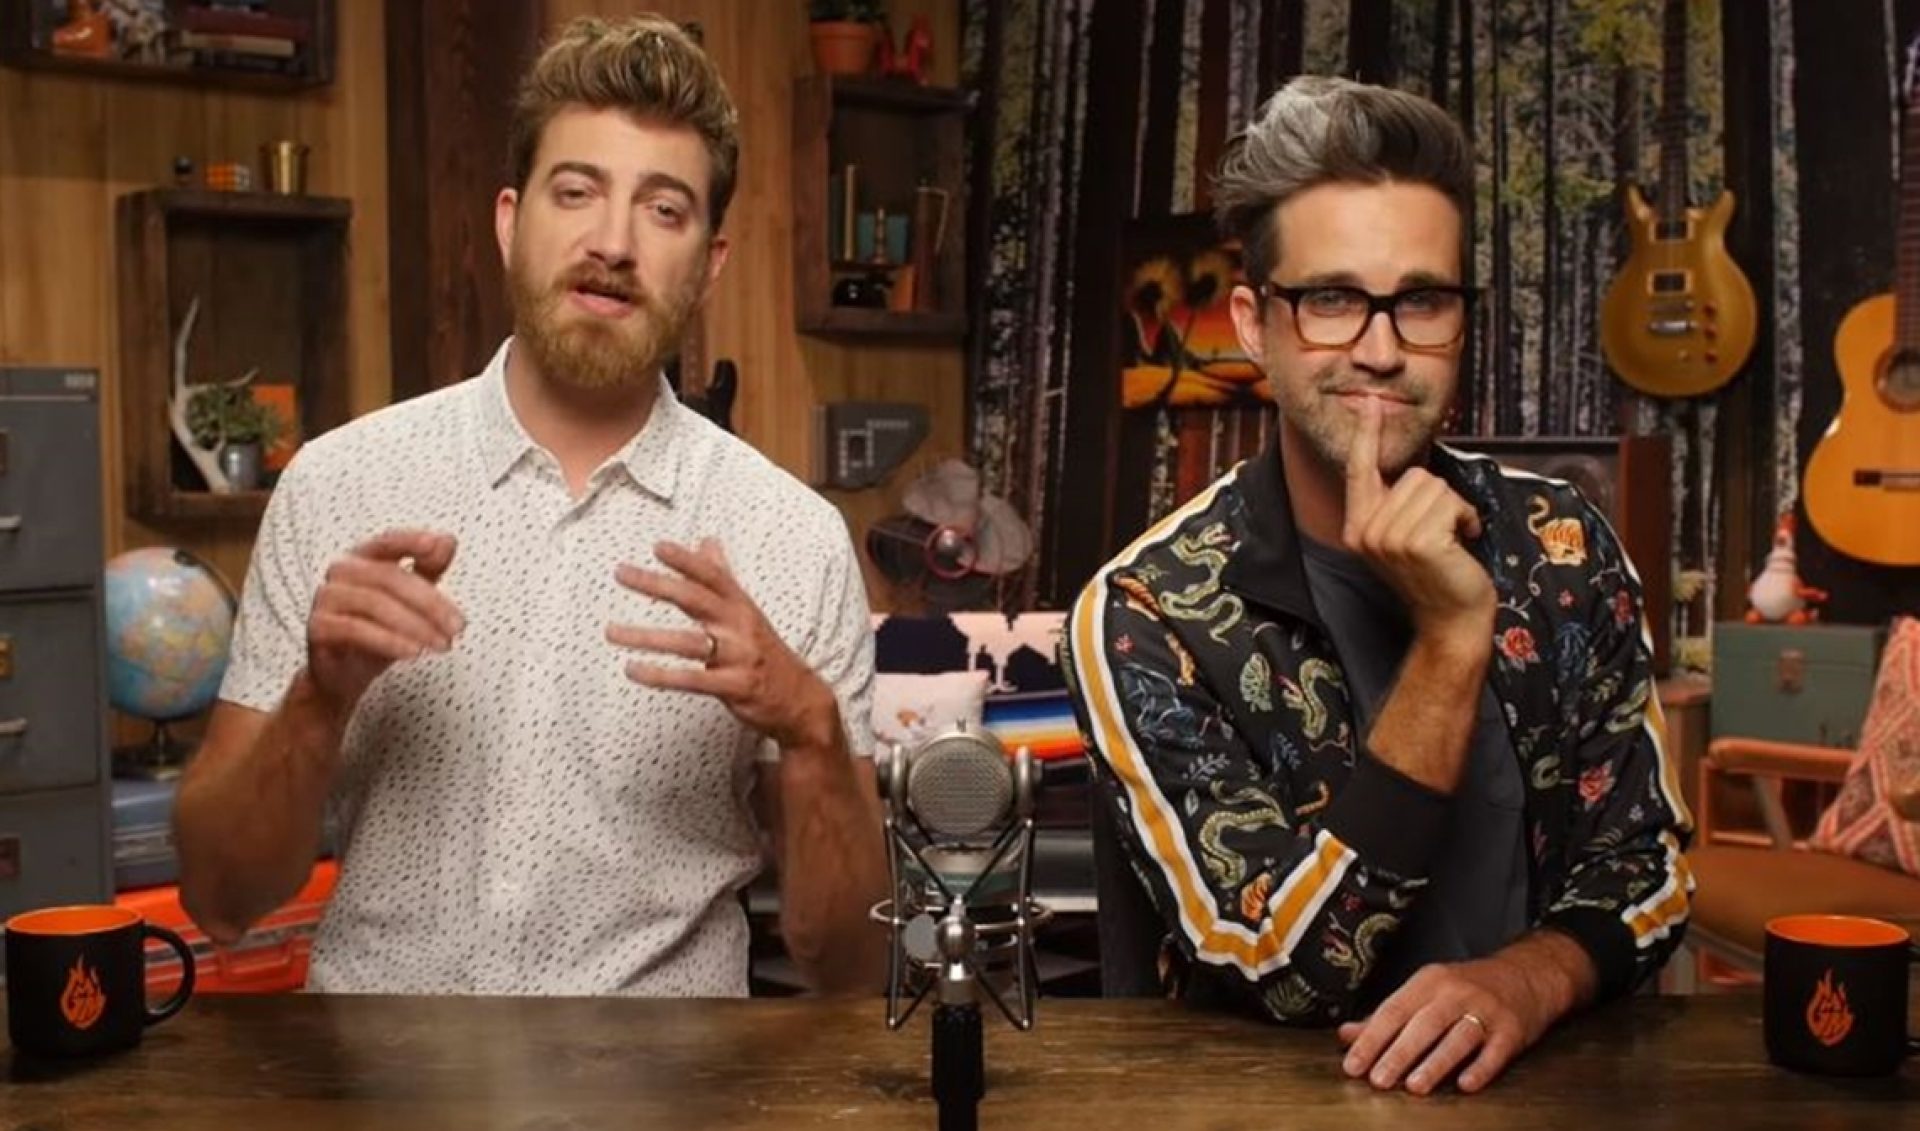 Rhett & Link Team With AIDS-Fighting Charity m2m To Raise Awareness, Funds